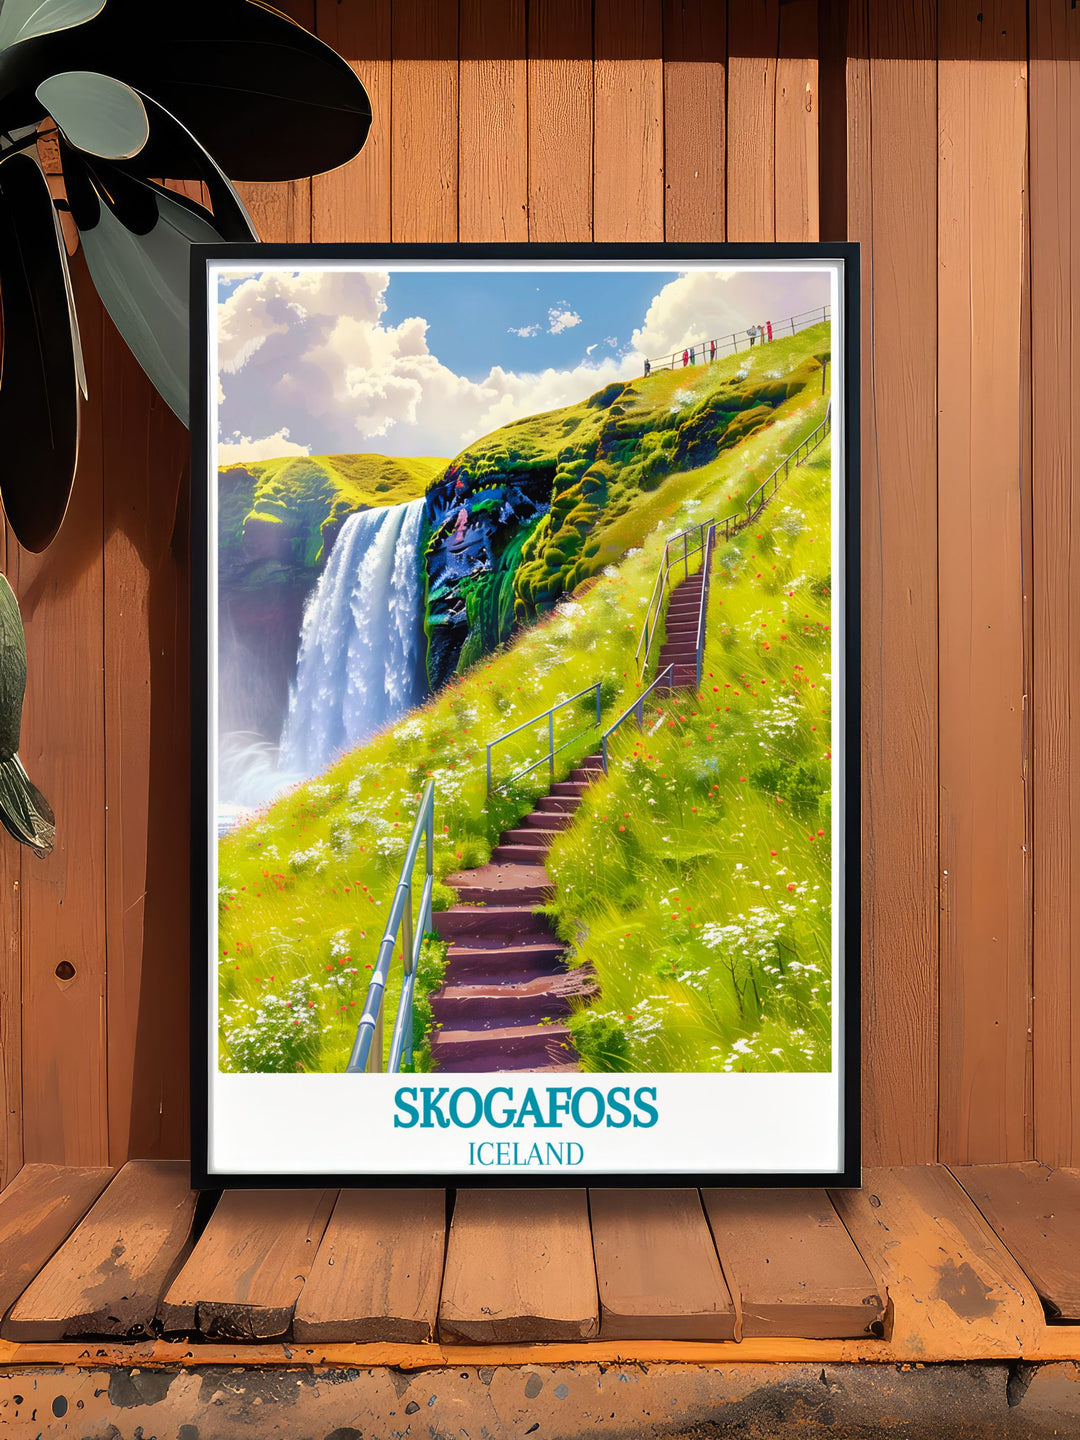 Embrace the raw power and natural splendor of Skogafoss with this travel poster, depicting the iconic waterfall and the adventurous hiking trail.